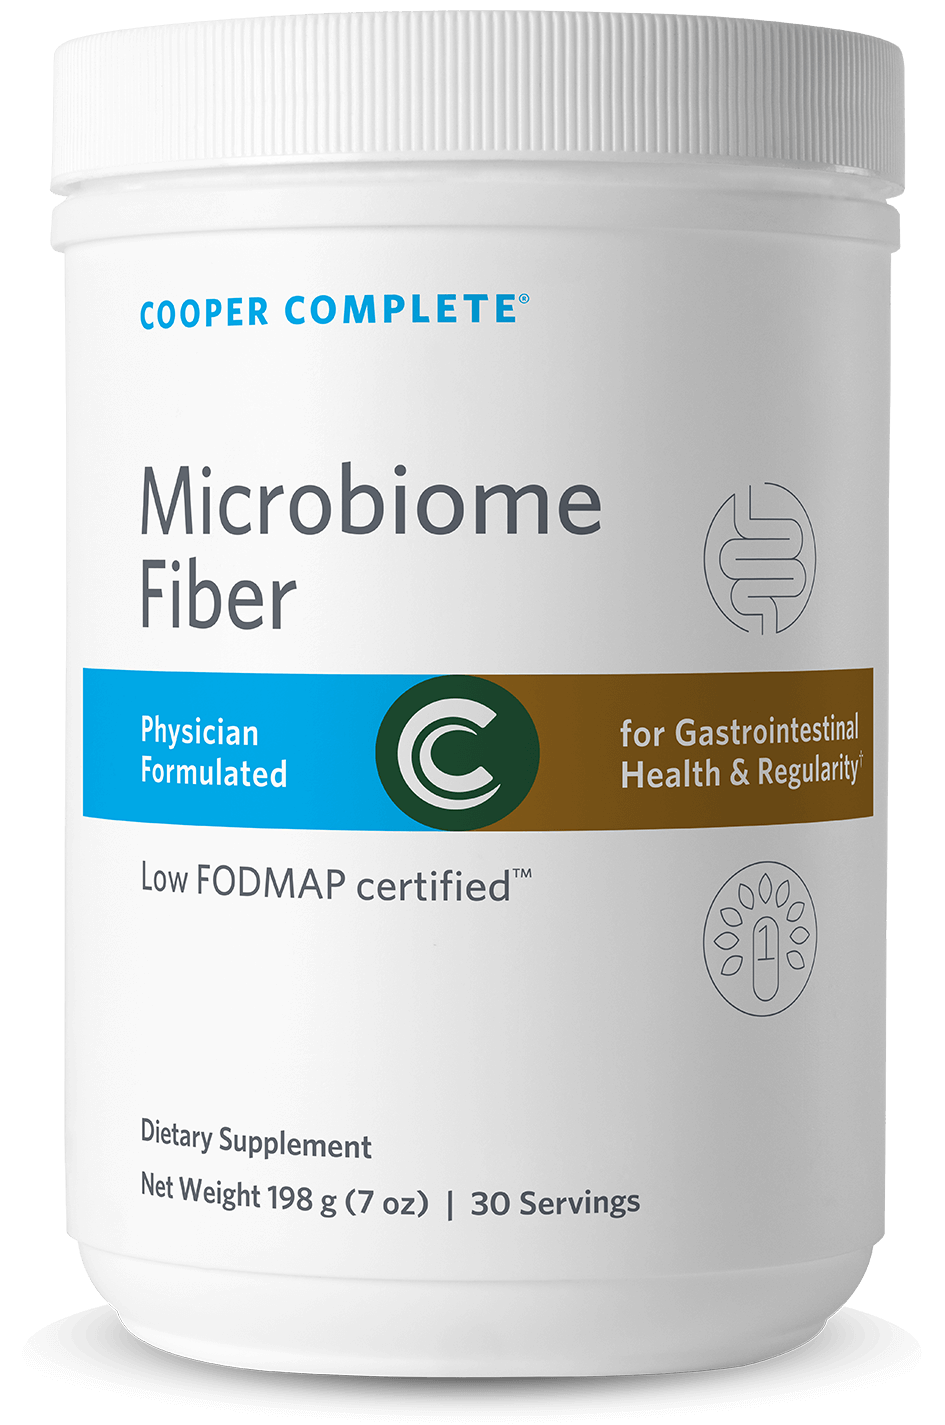 Photo of Cooper Complete Microbiome Fiber Supplement bottle.